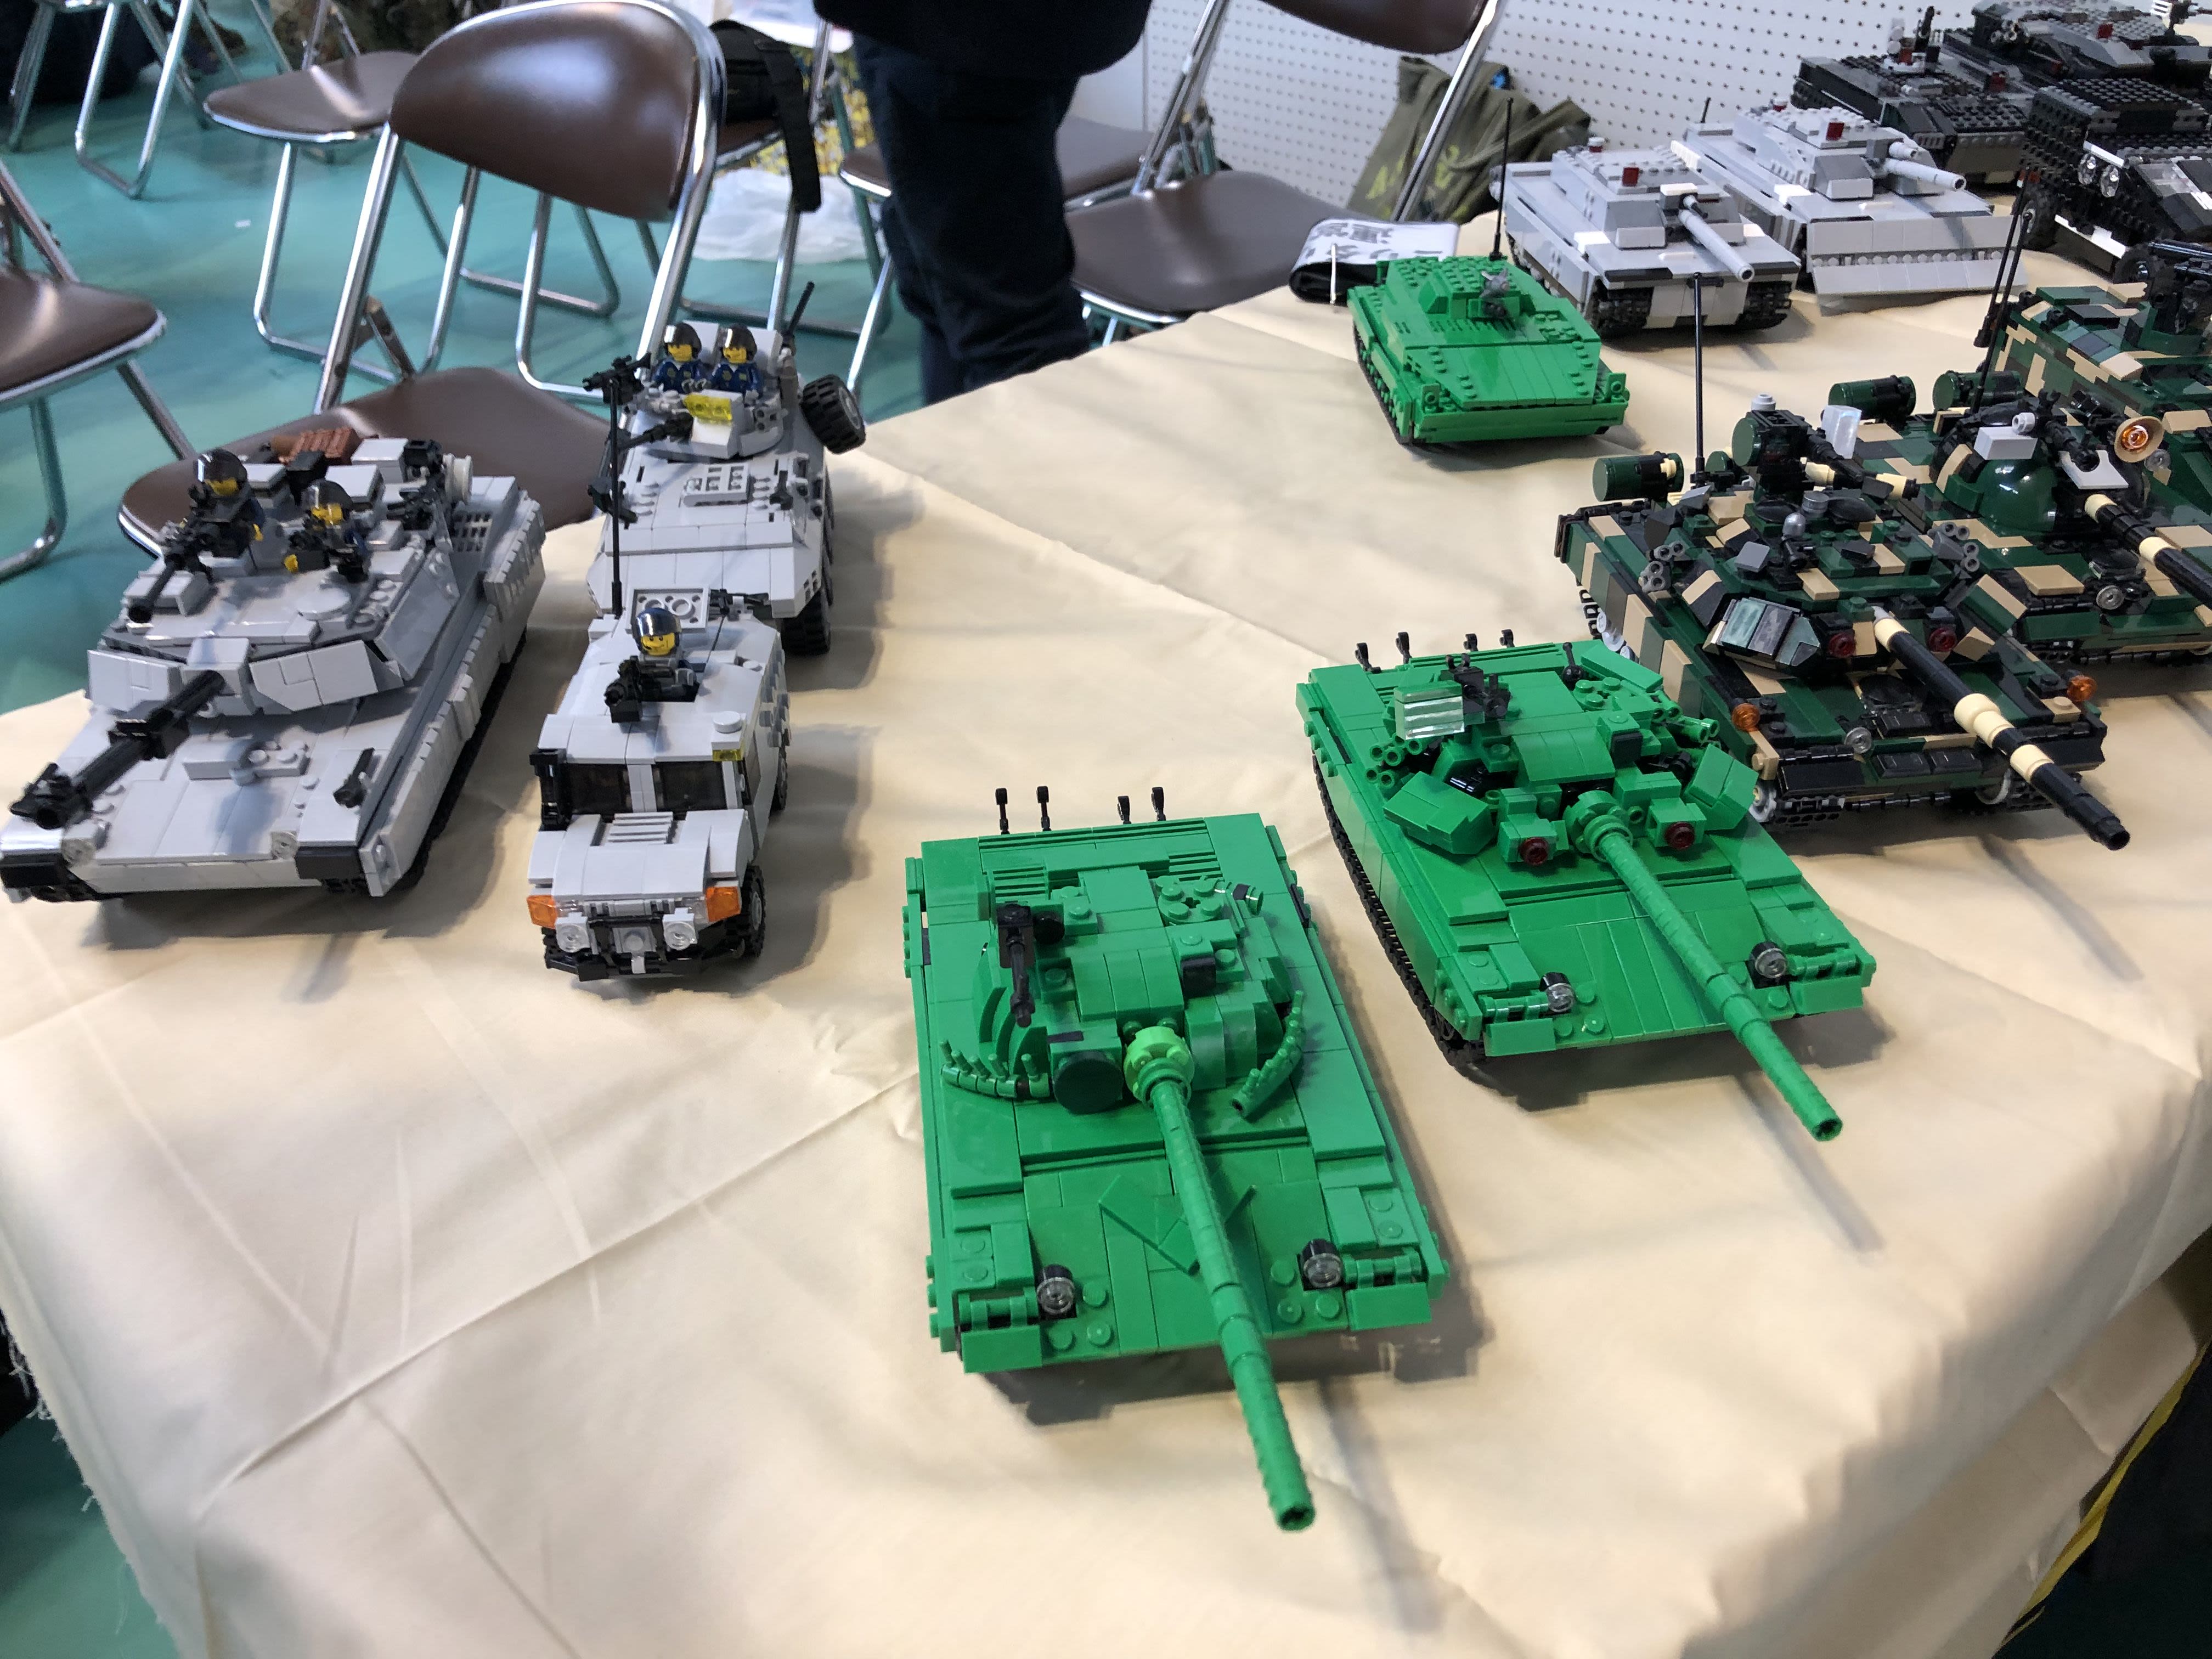 LEGO Army – Will we ever see Army Sets?